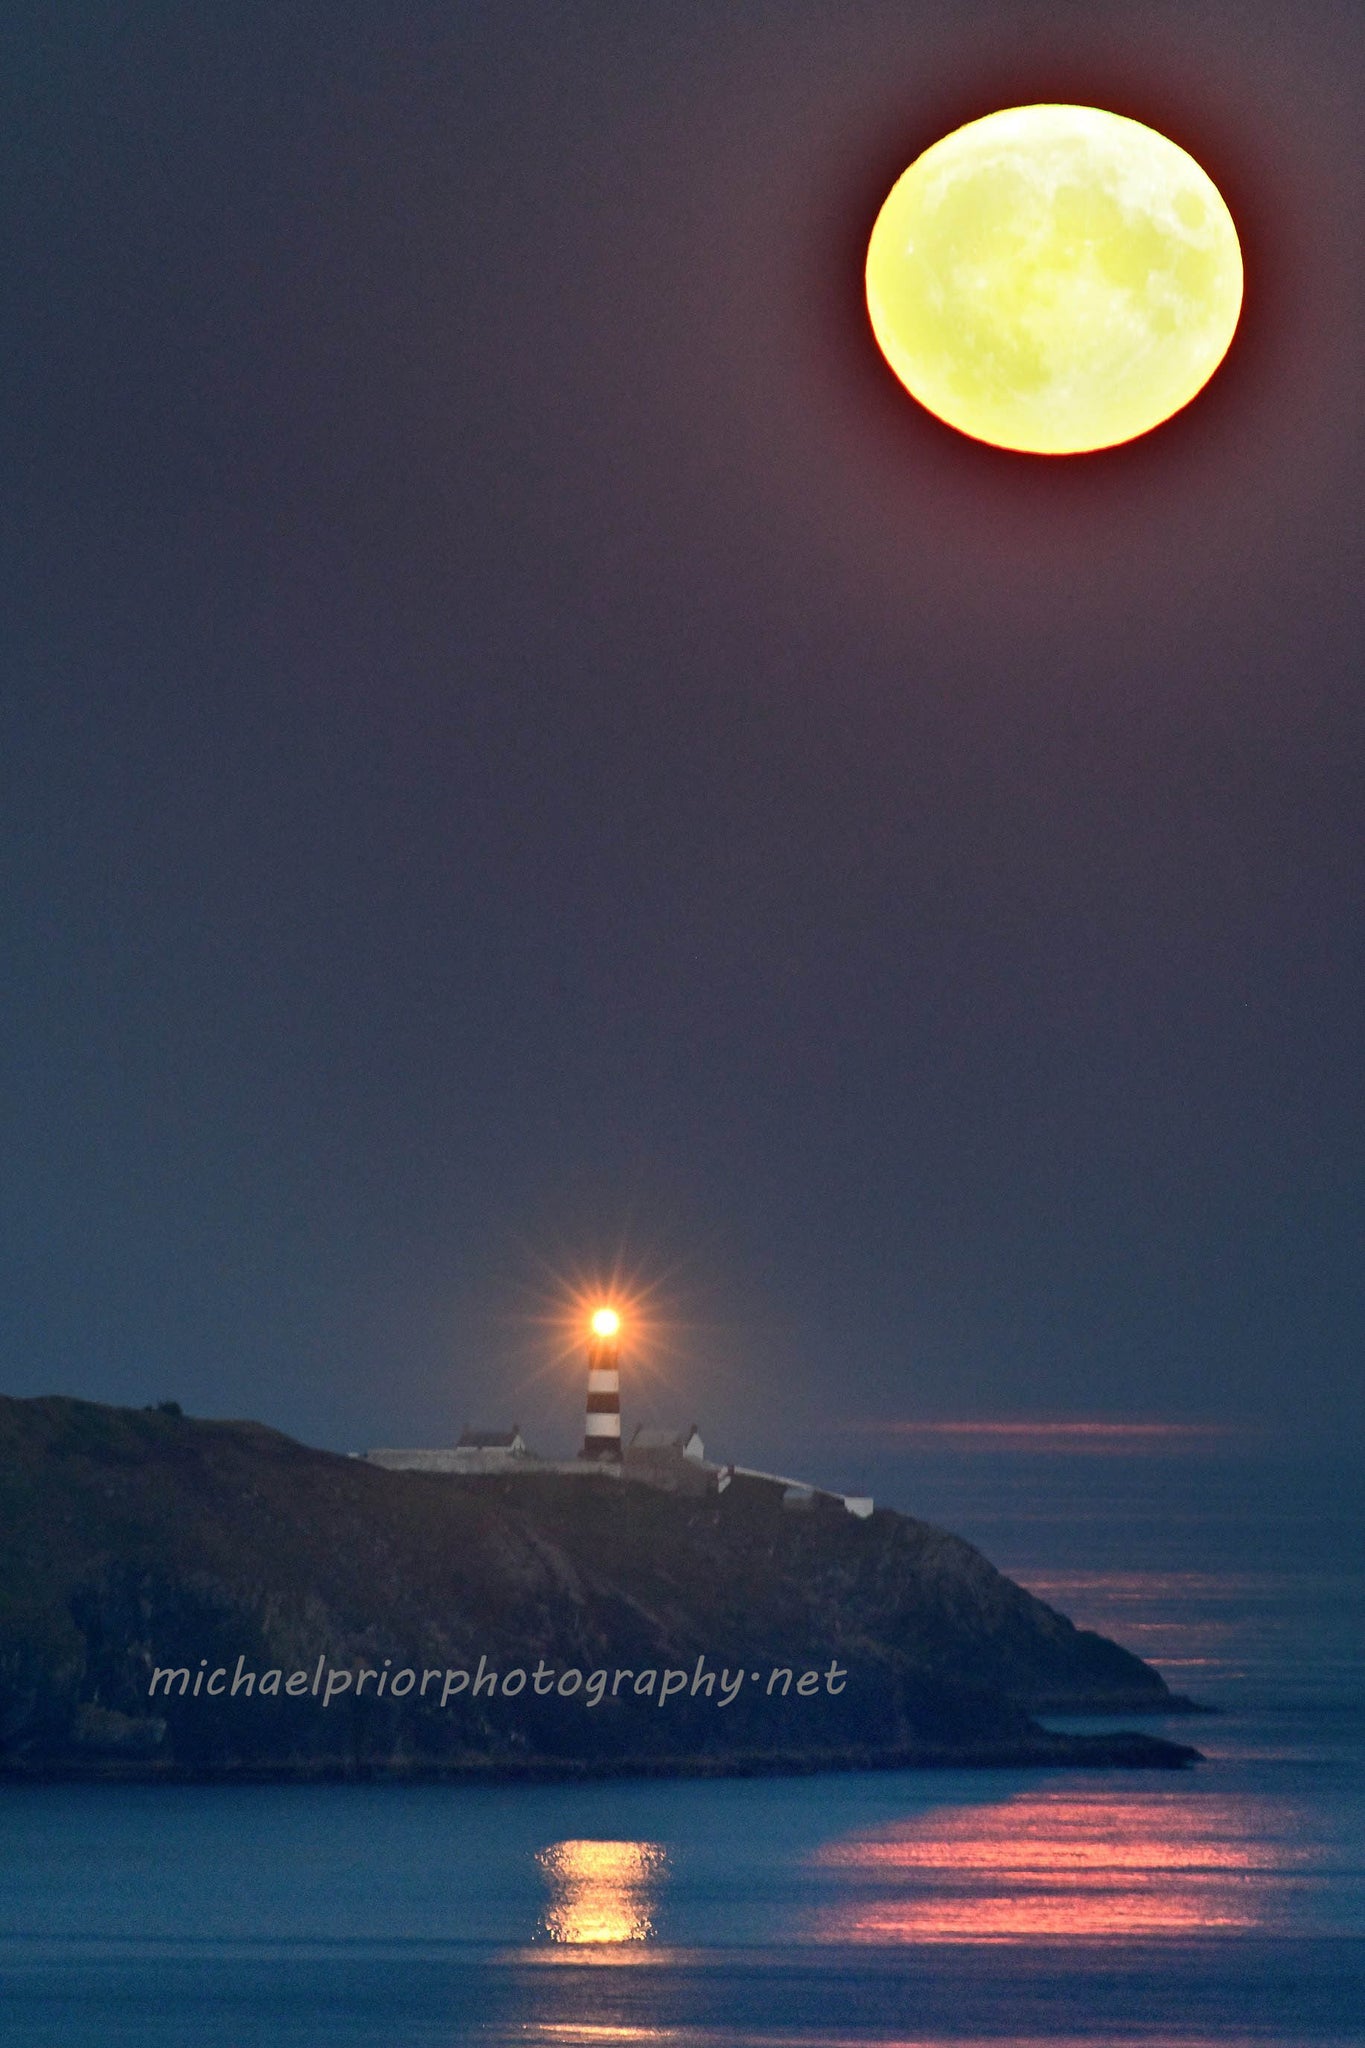 Full (sturgeon) moon rising over the Oldhead lighthouse in west Cork